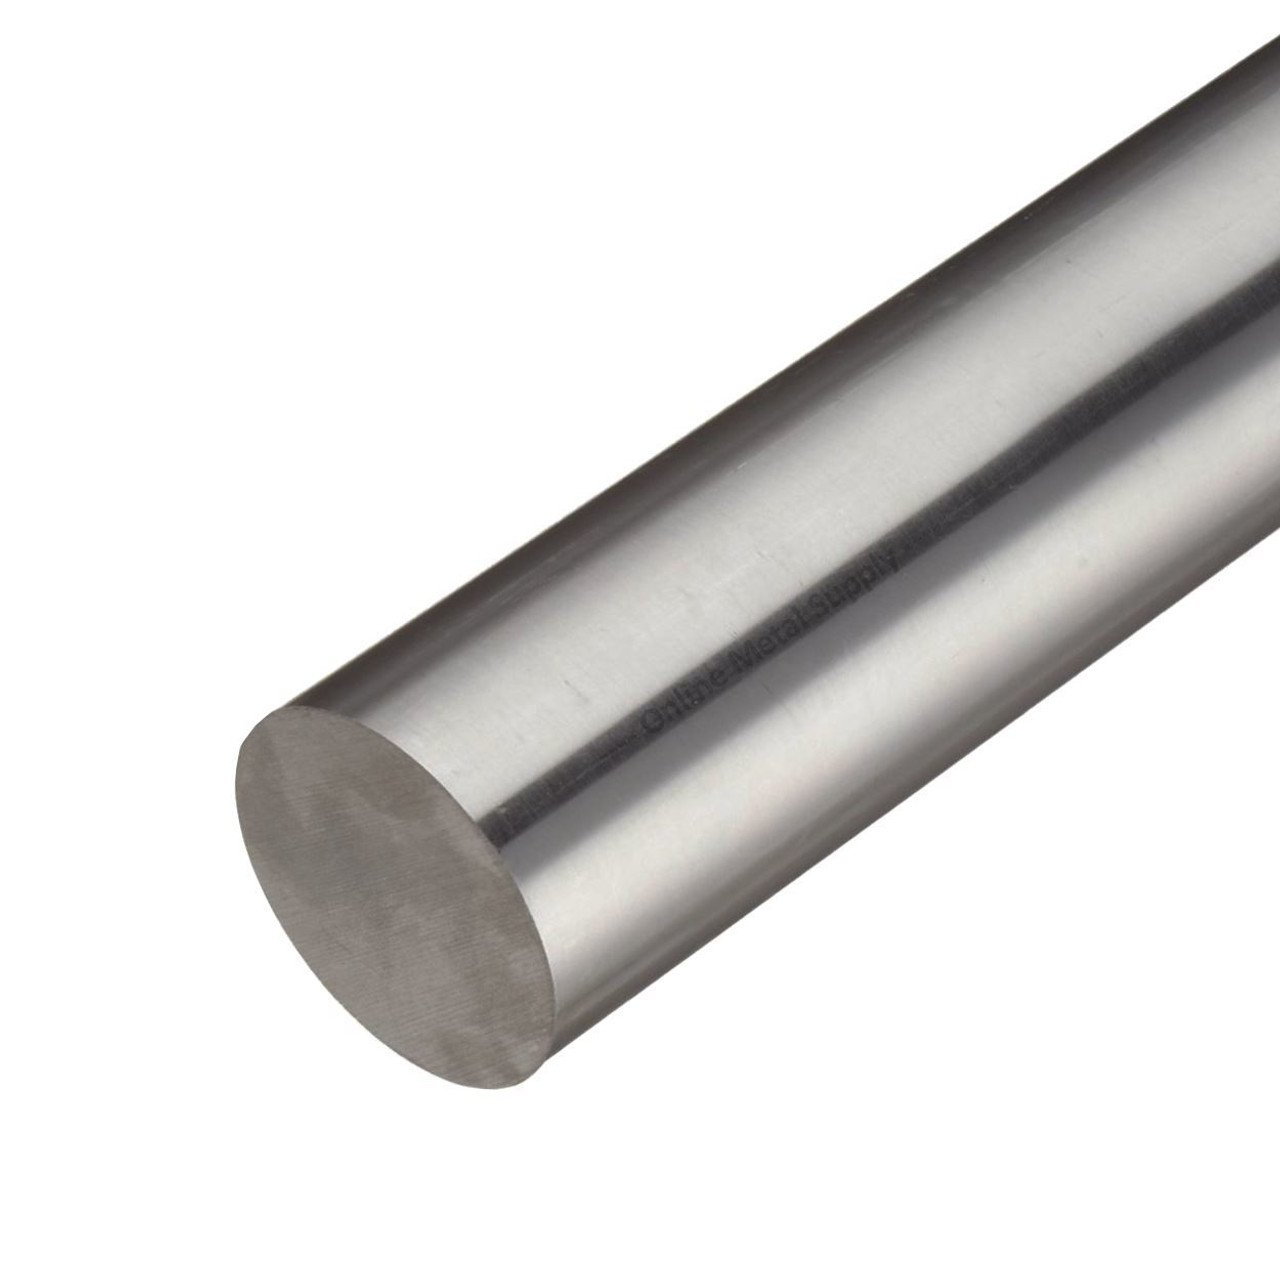 2.500 (2-1/2 inch) x 12 inches, 13-8 Cond A Stainless Steel Round Rod, Cold Finished